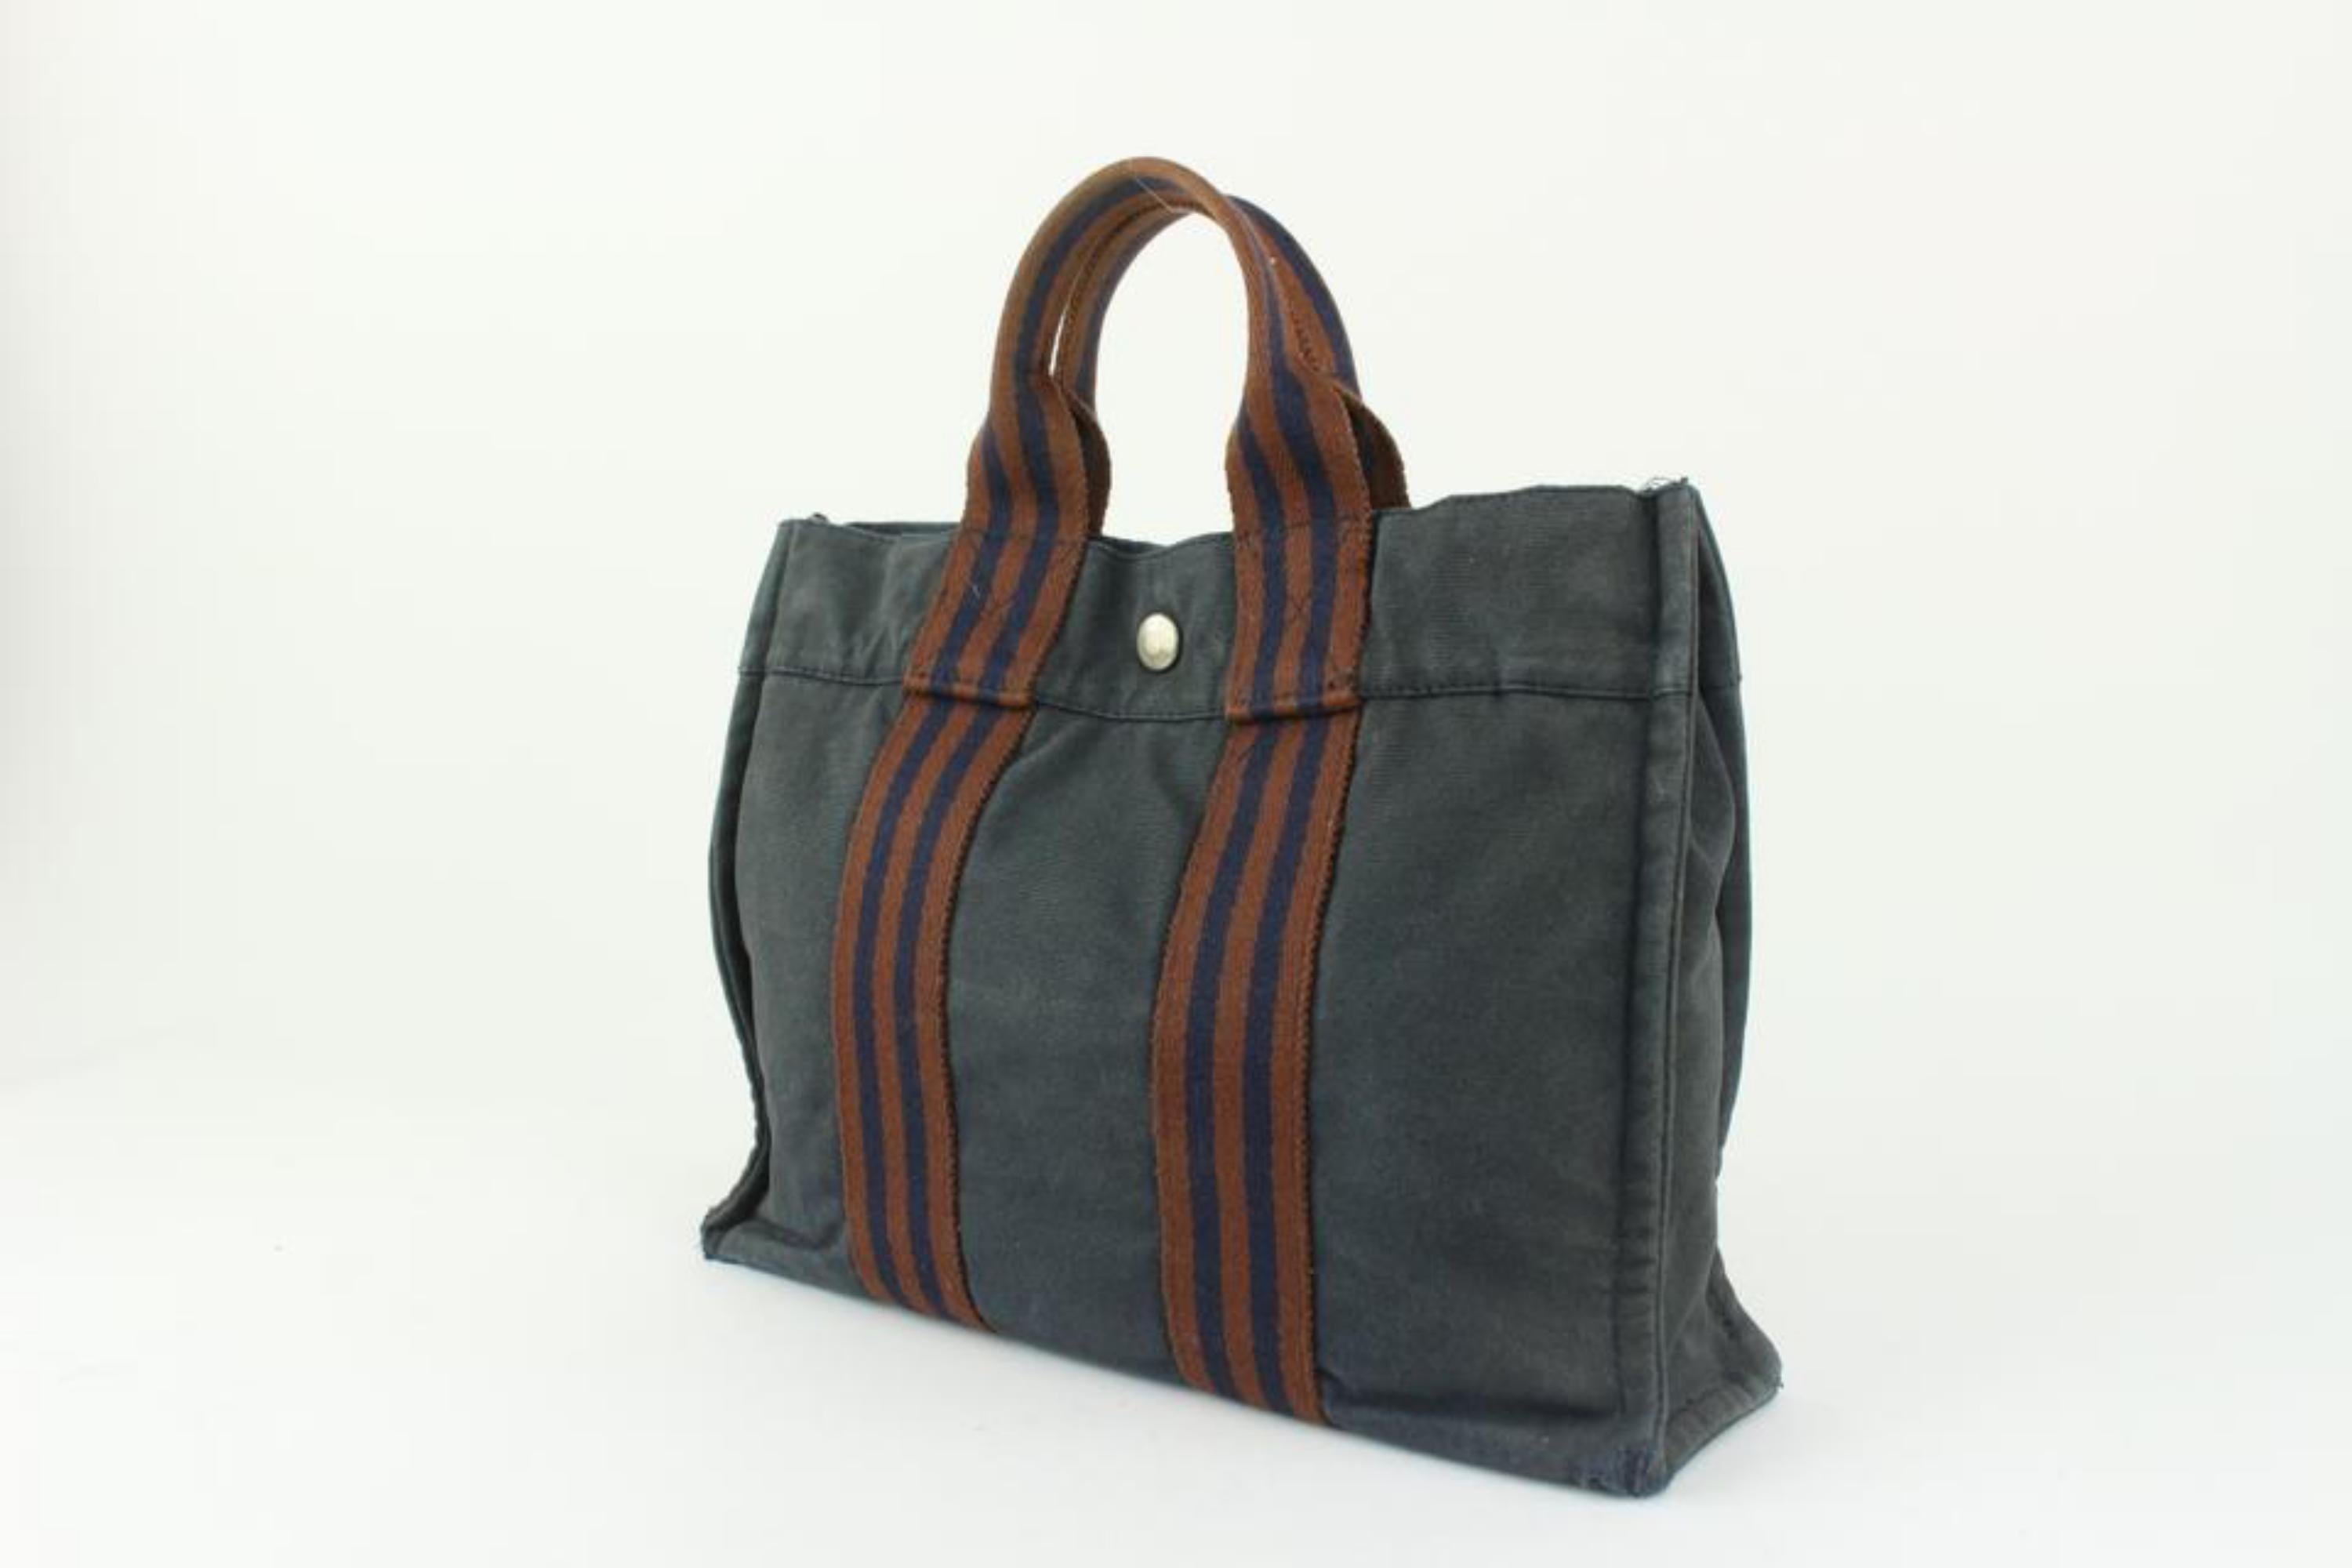 Hermès Navy Striped Fourre Tout PM Tote Bag 1216h2
Made In: France
Measurements: Length:  11.5